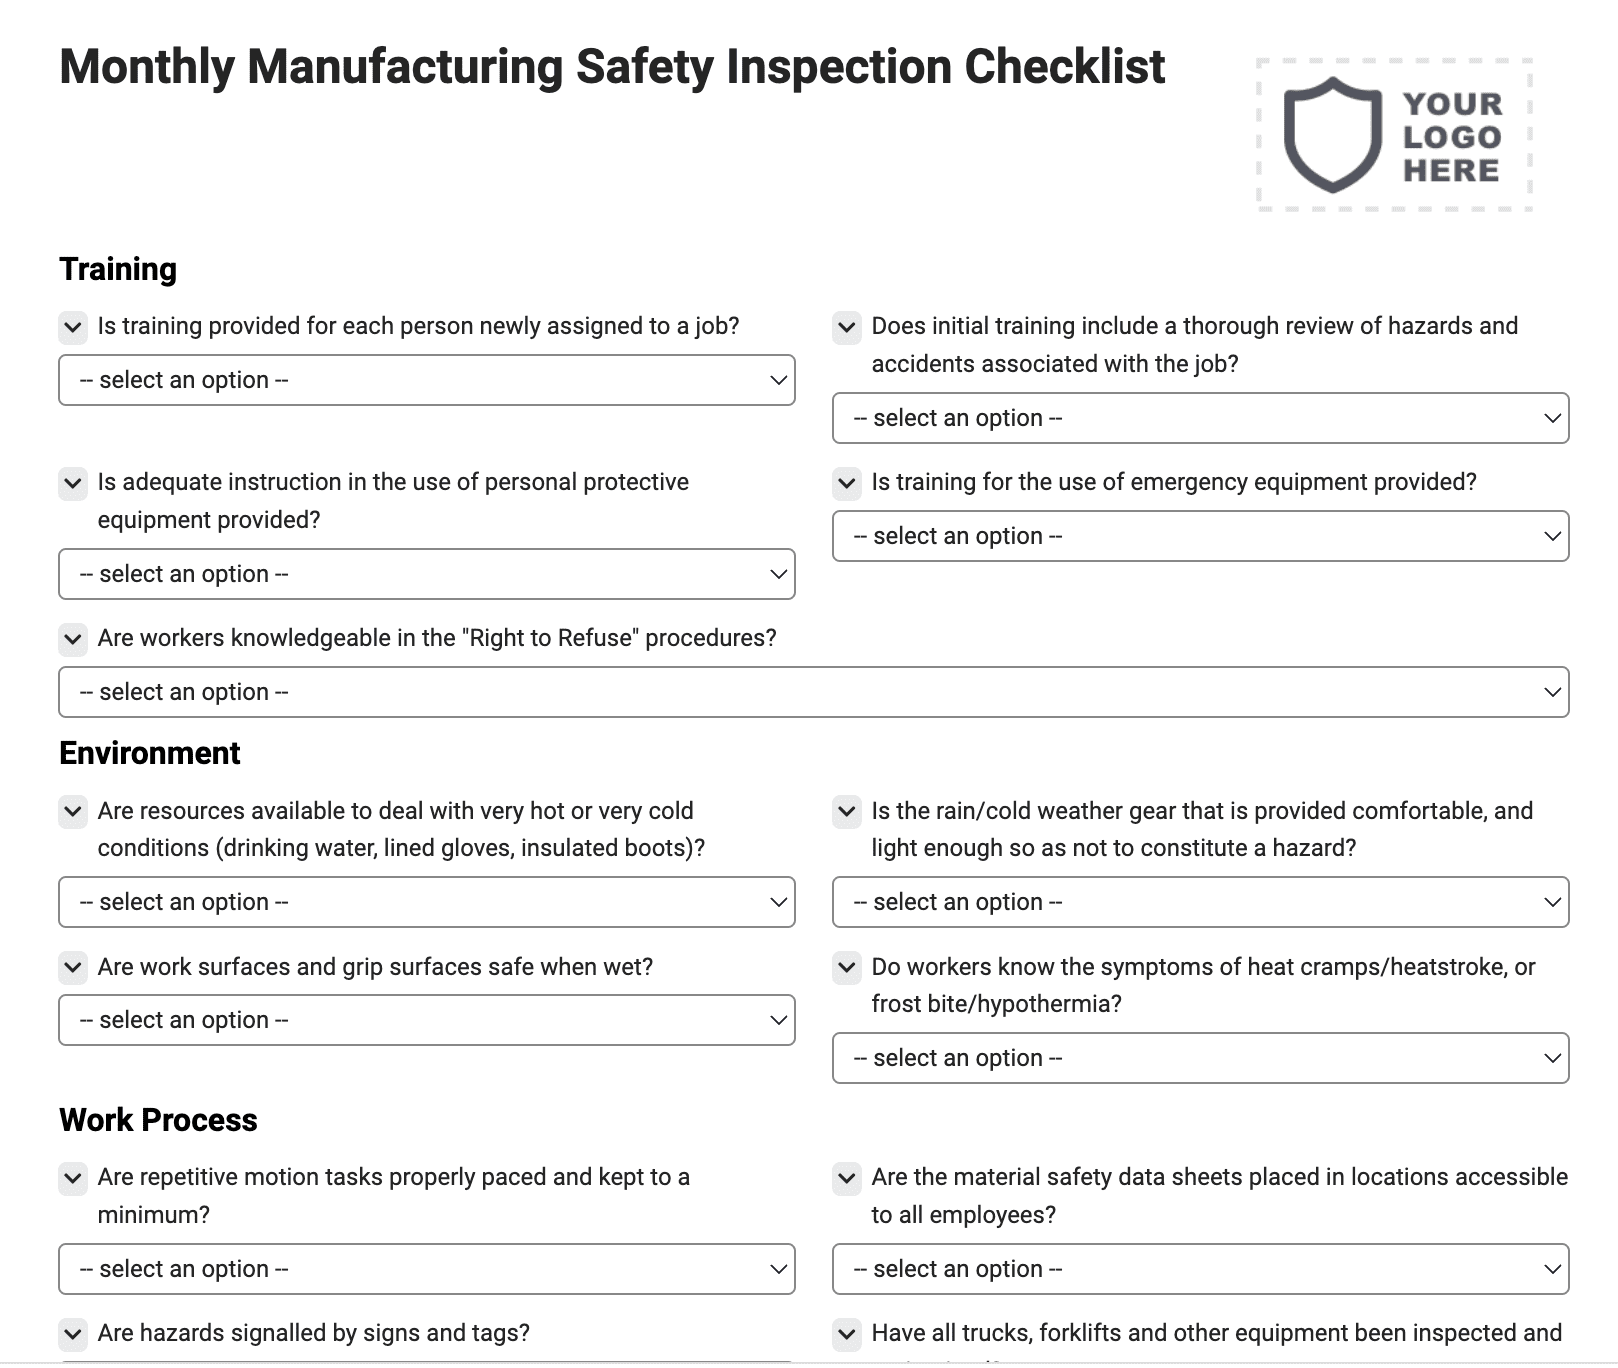 Monthly Manufacturing Safety Inspection Checklist